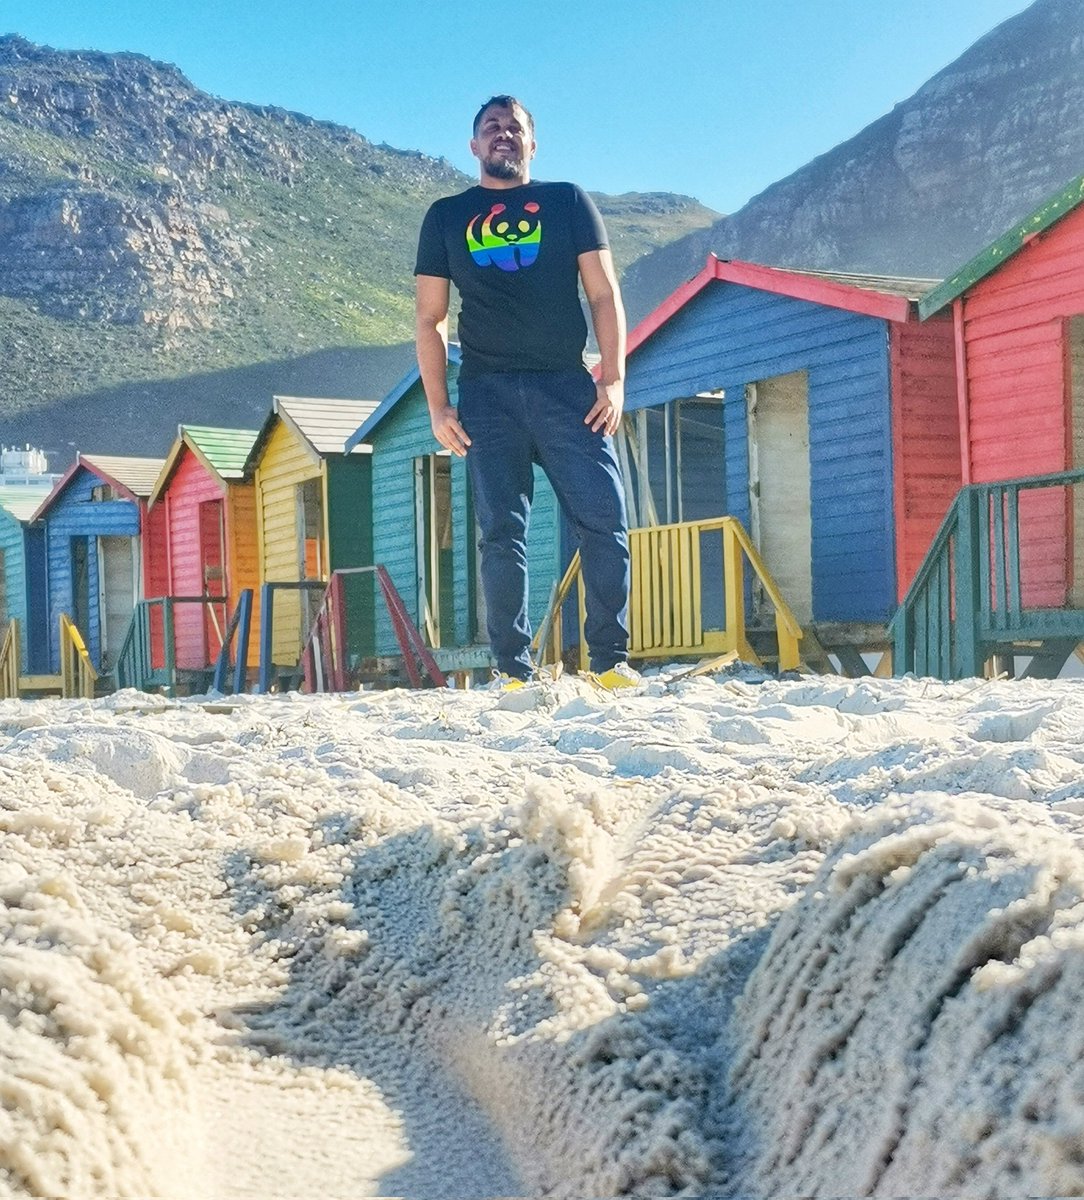 A visit to the popular Muizenberg Beach was just what was needed this weekend.

#wwfsouthafrica #WWFStyleChallenge #tshirtchallenge #stylechallenge #ootd #IAMCAPETOWN #capetown #lovecapetown #southafrica #shotleft #discoverctwc #tavelmassivect #TravelMassive #TravelChatSA #wwfsa